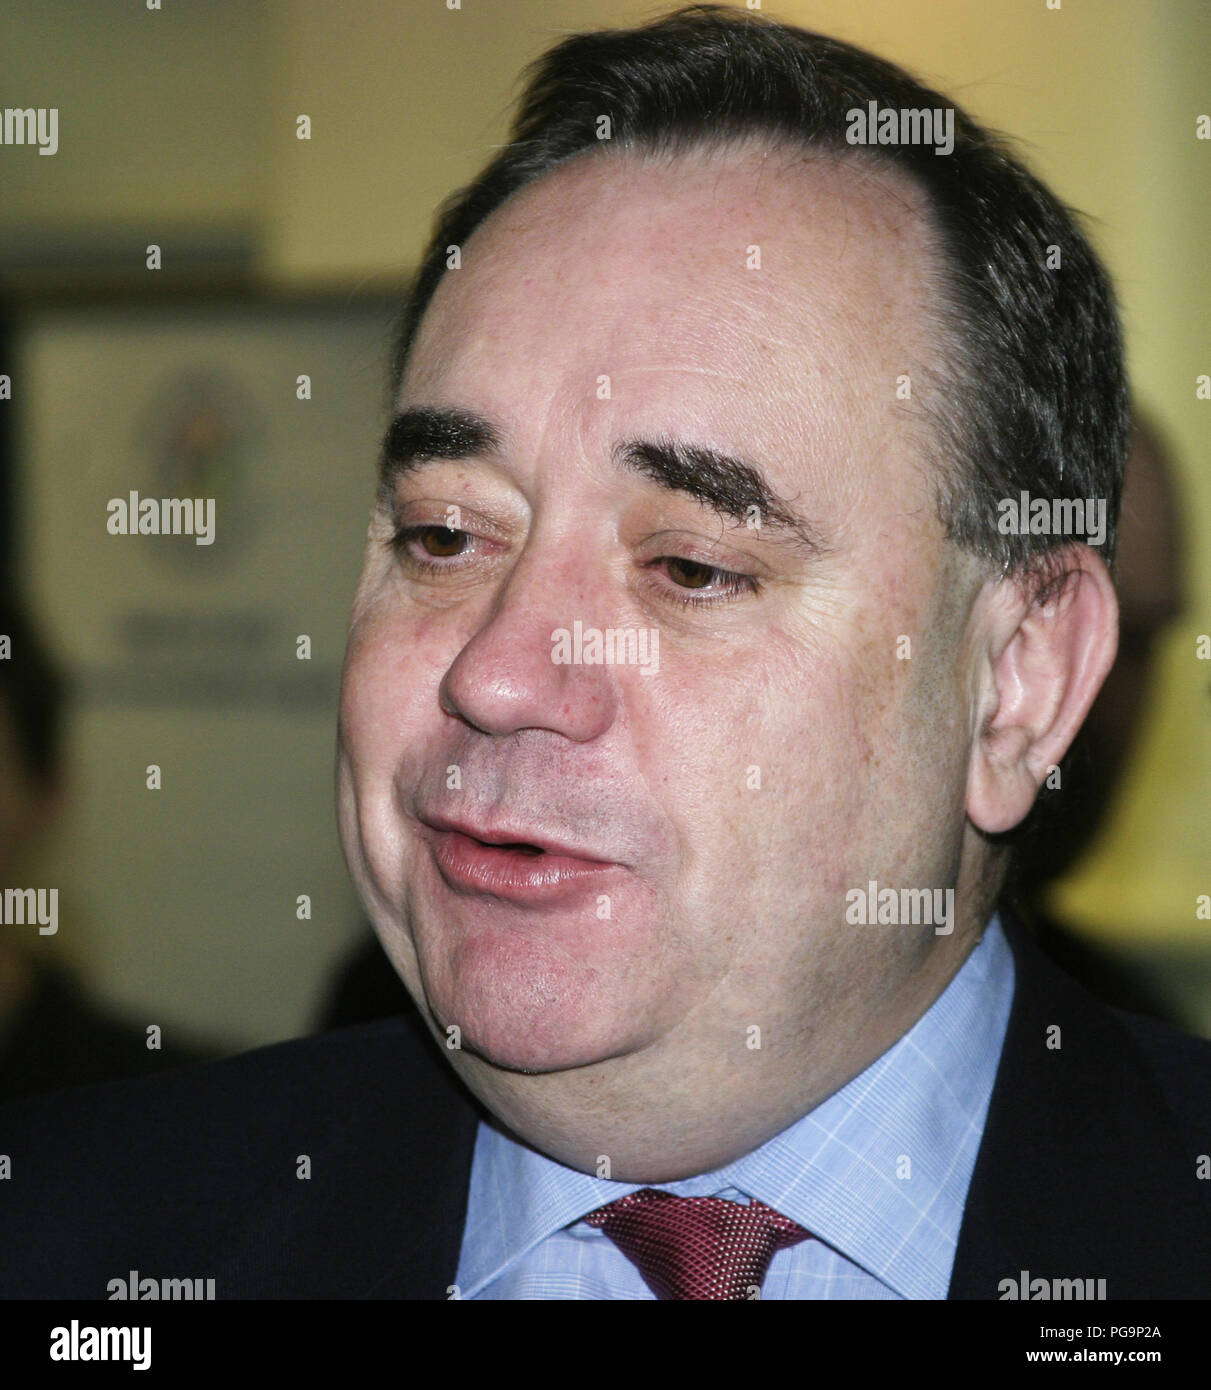 Alex Salmond. The former leader and MSP of the Scottish National Party ...